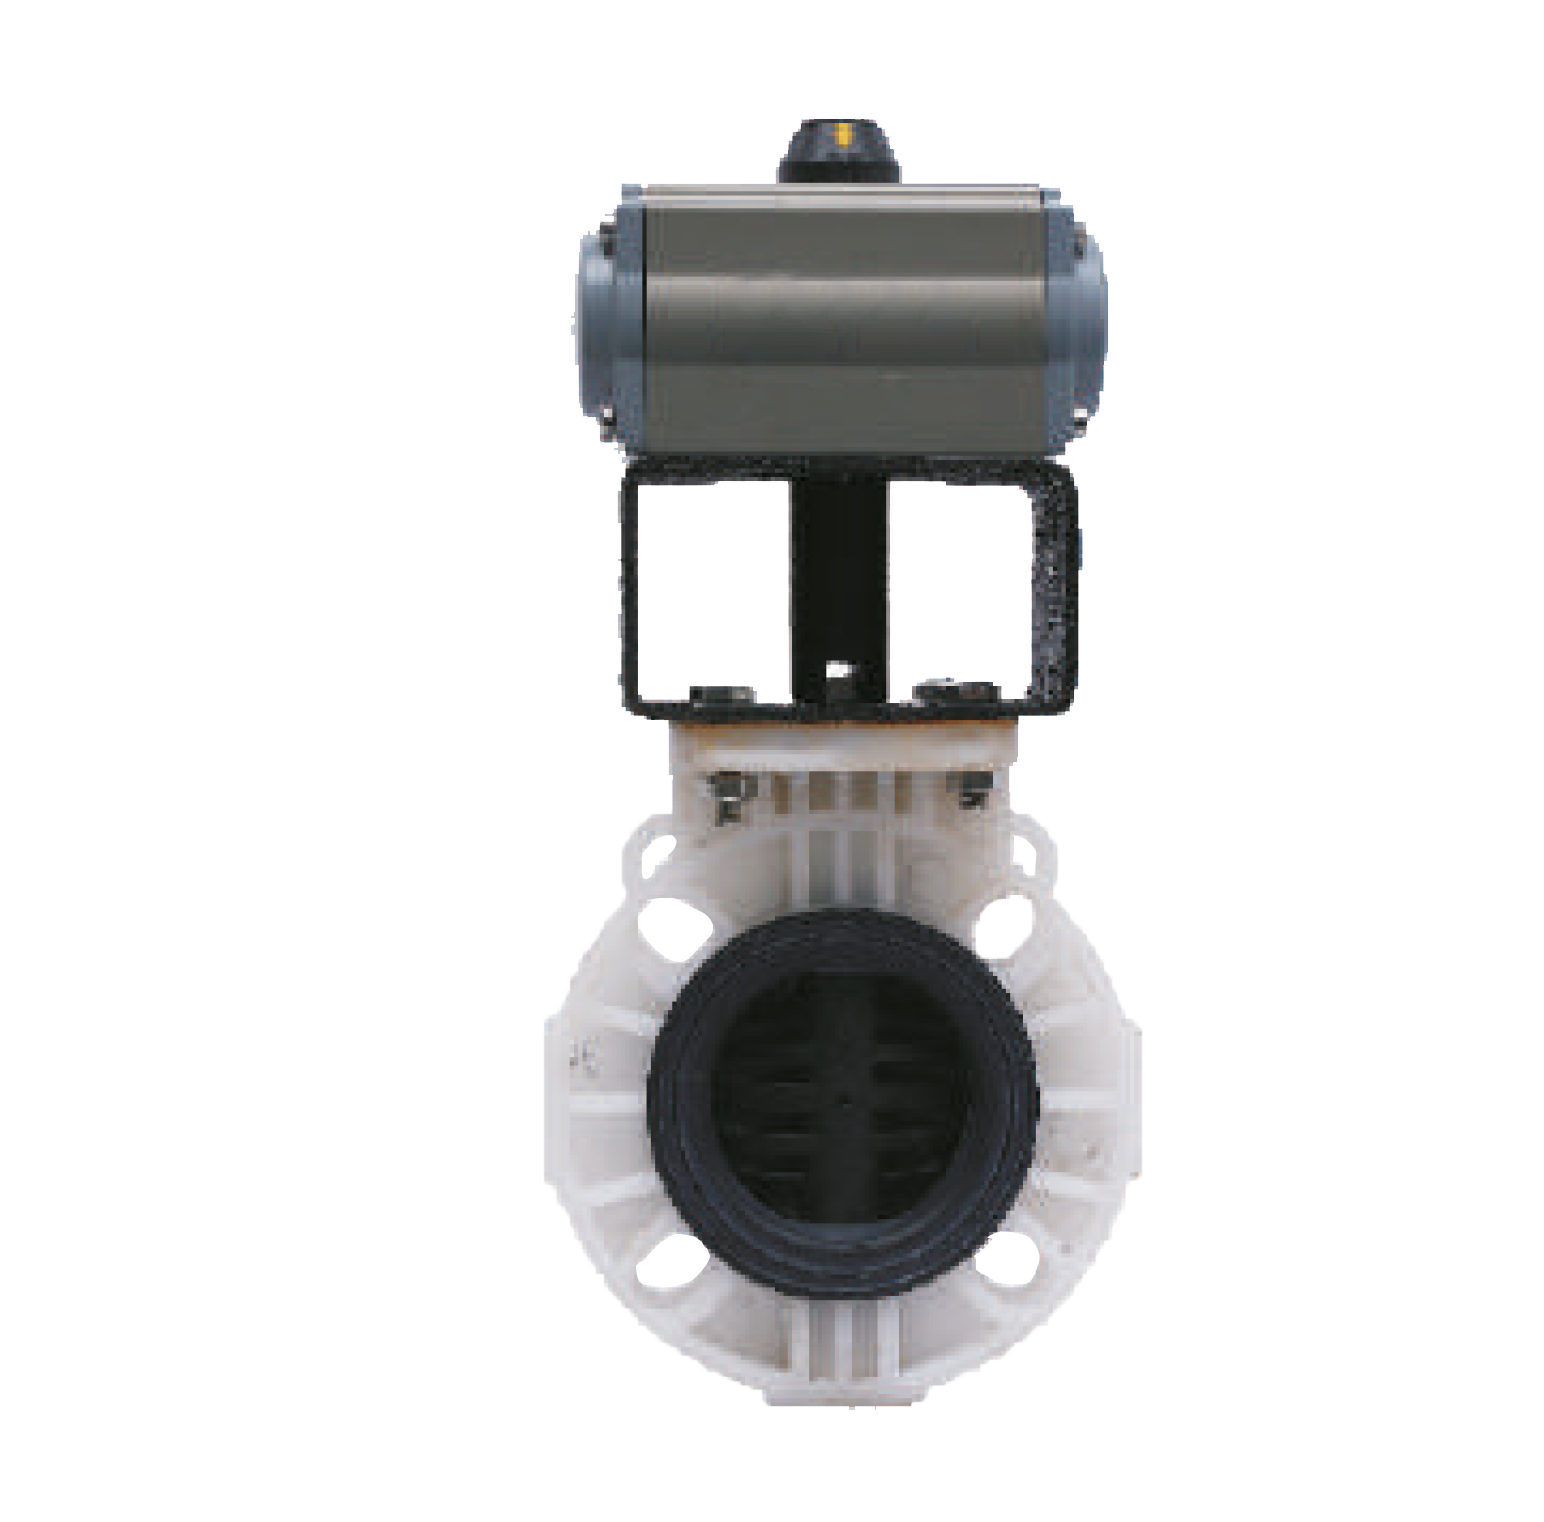 Global Valve Automation - Automation - Pneumatic and Electric Actuator Operated Polypropylene Butterfly Valve